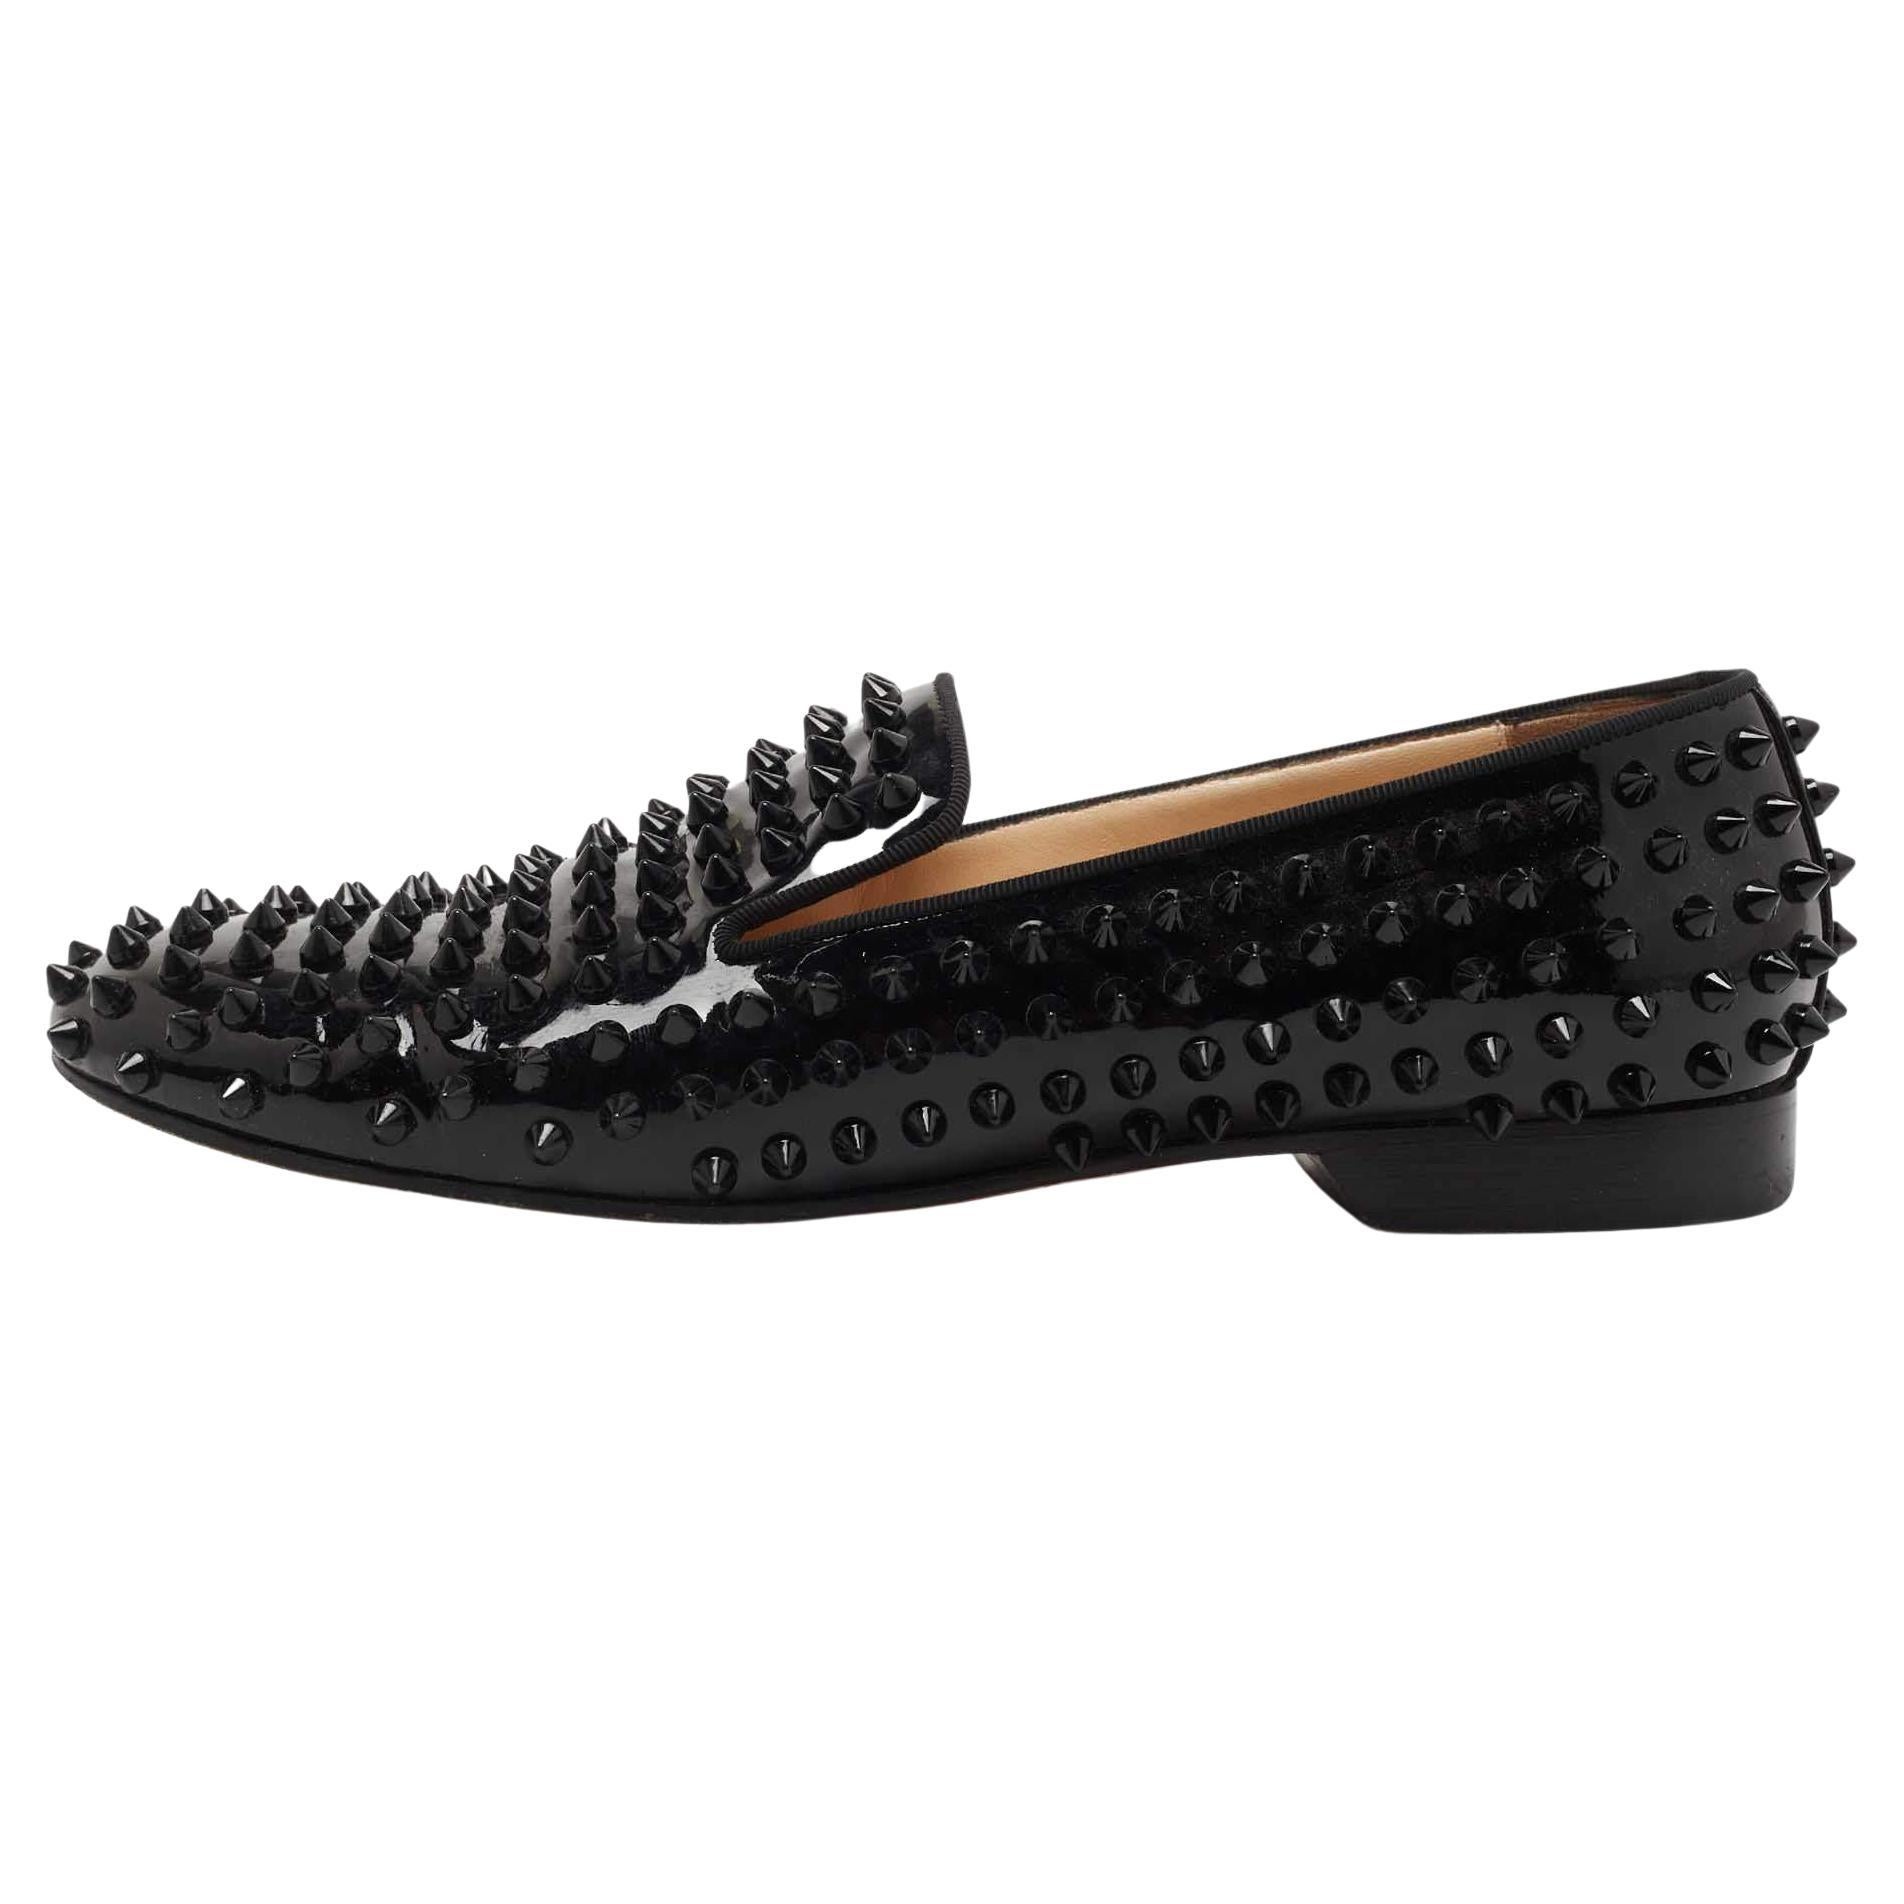 Christian Louboutin Christian Louboutin Dandelion Spikes Loafers In Black  Suede Flats Loafers on SALE